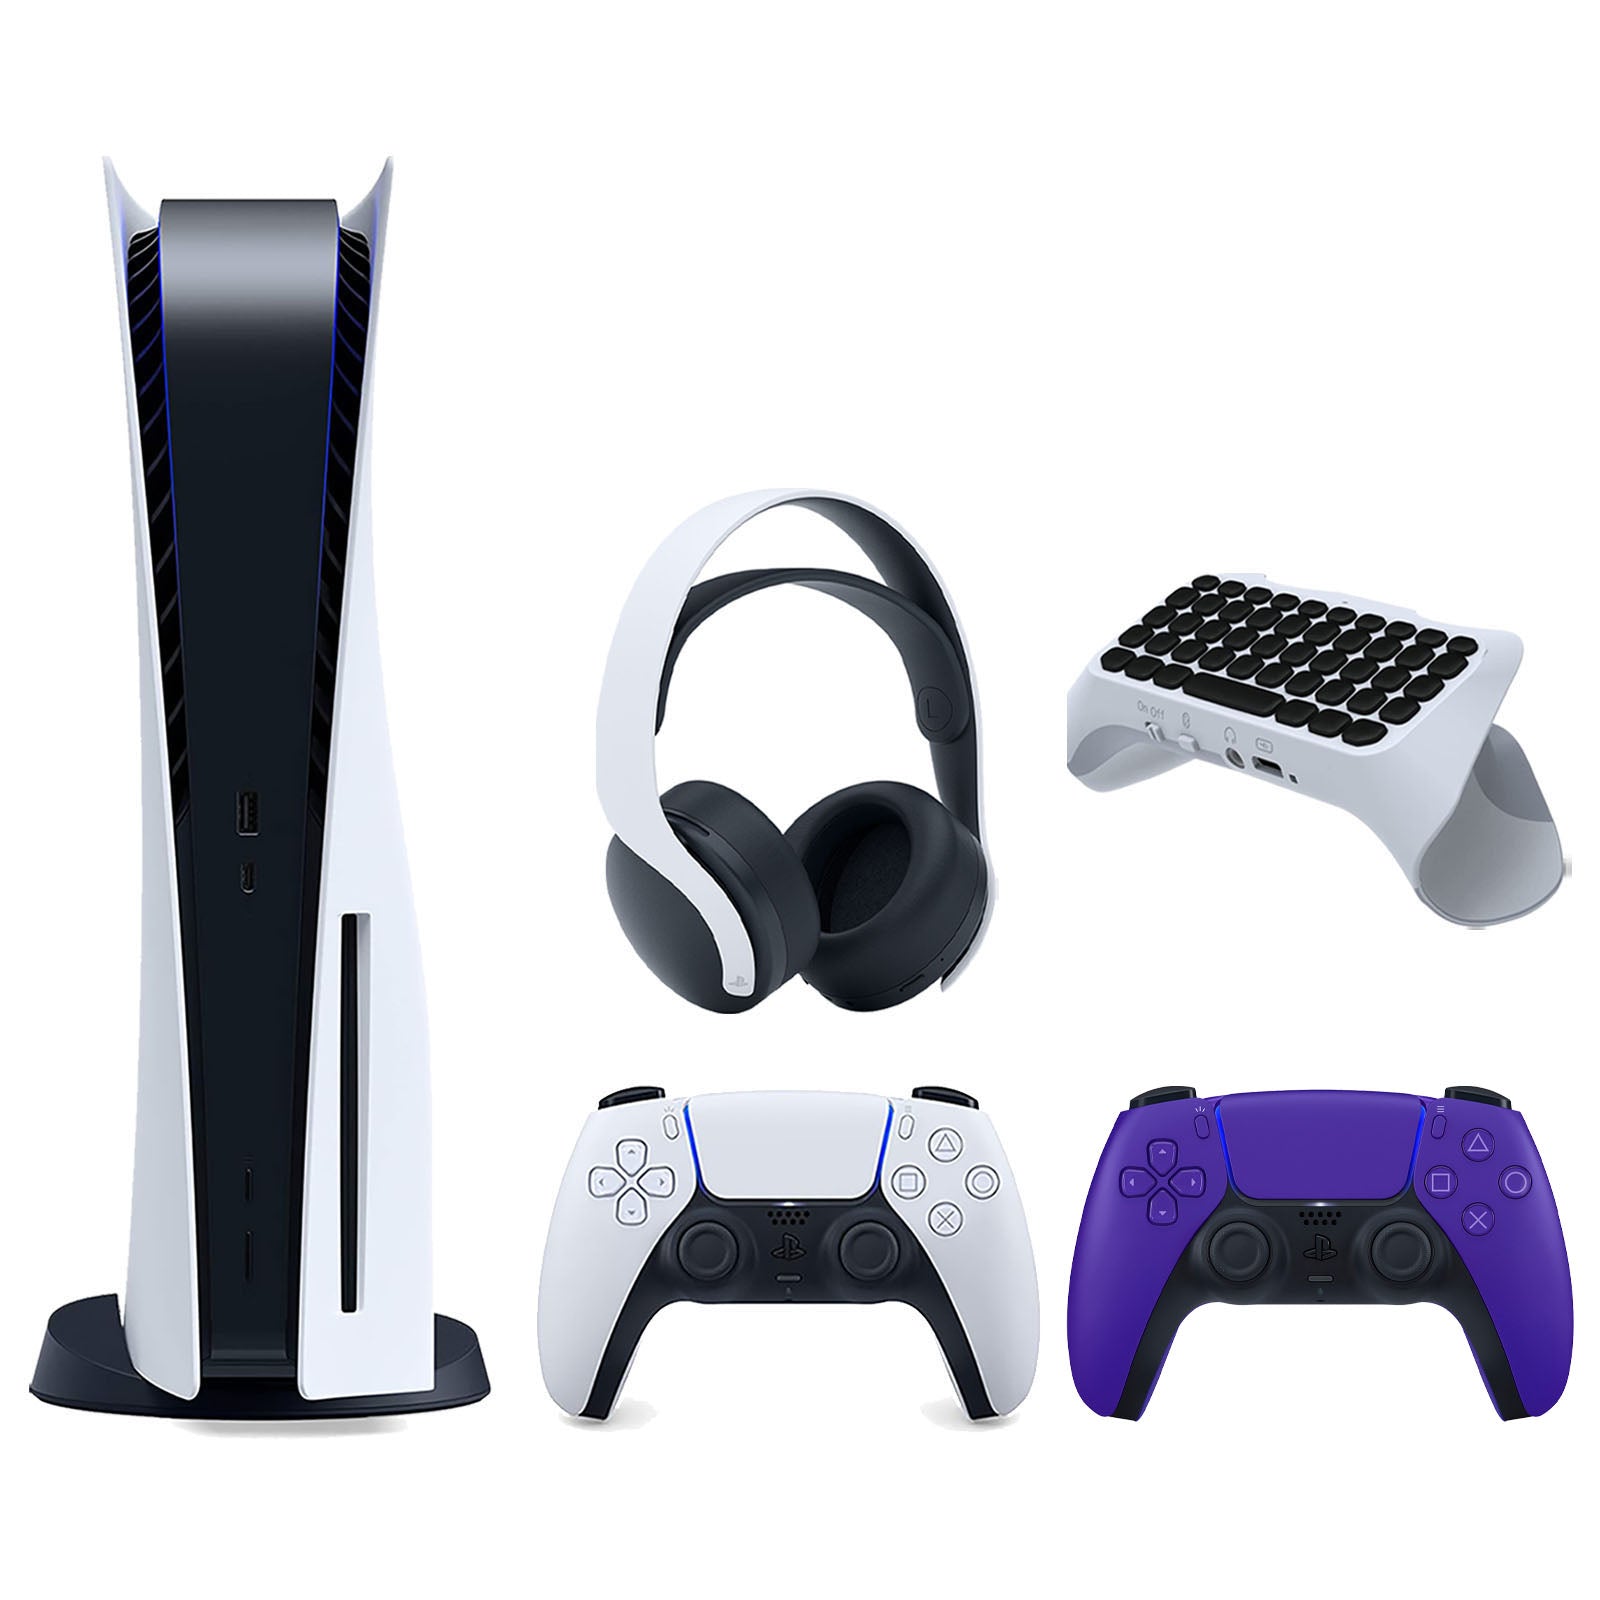 Sony Playstation 5 Disc Version Console with Extra Purple Controller, White PULSE 3D Headset and Surge QuickType 2.0 Wireless PS5 Controller Keypad Bundle - Pro-Distributing